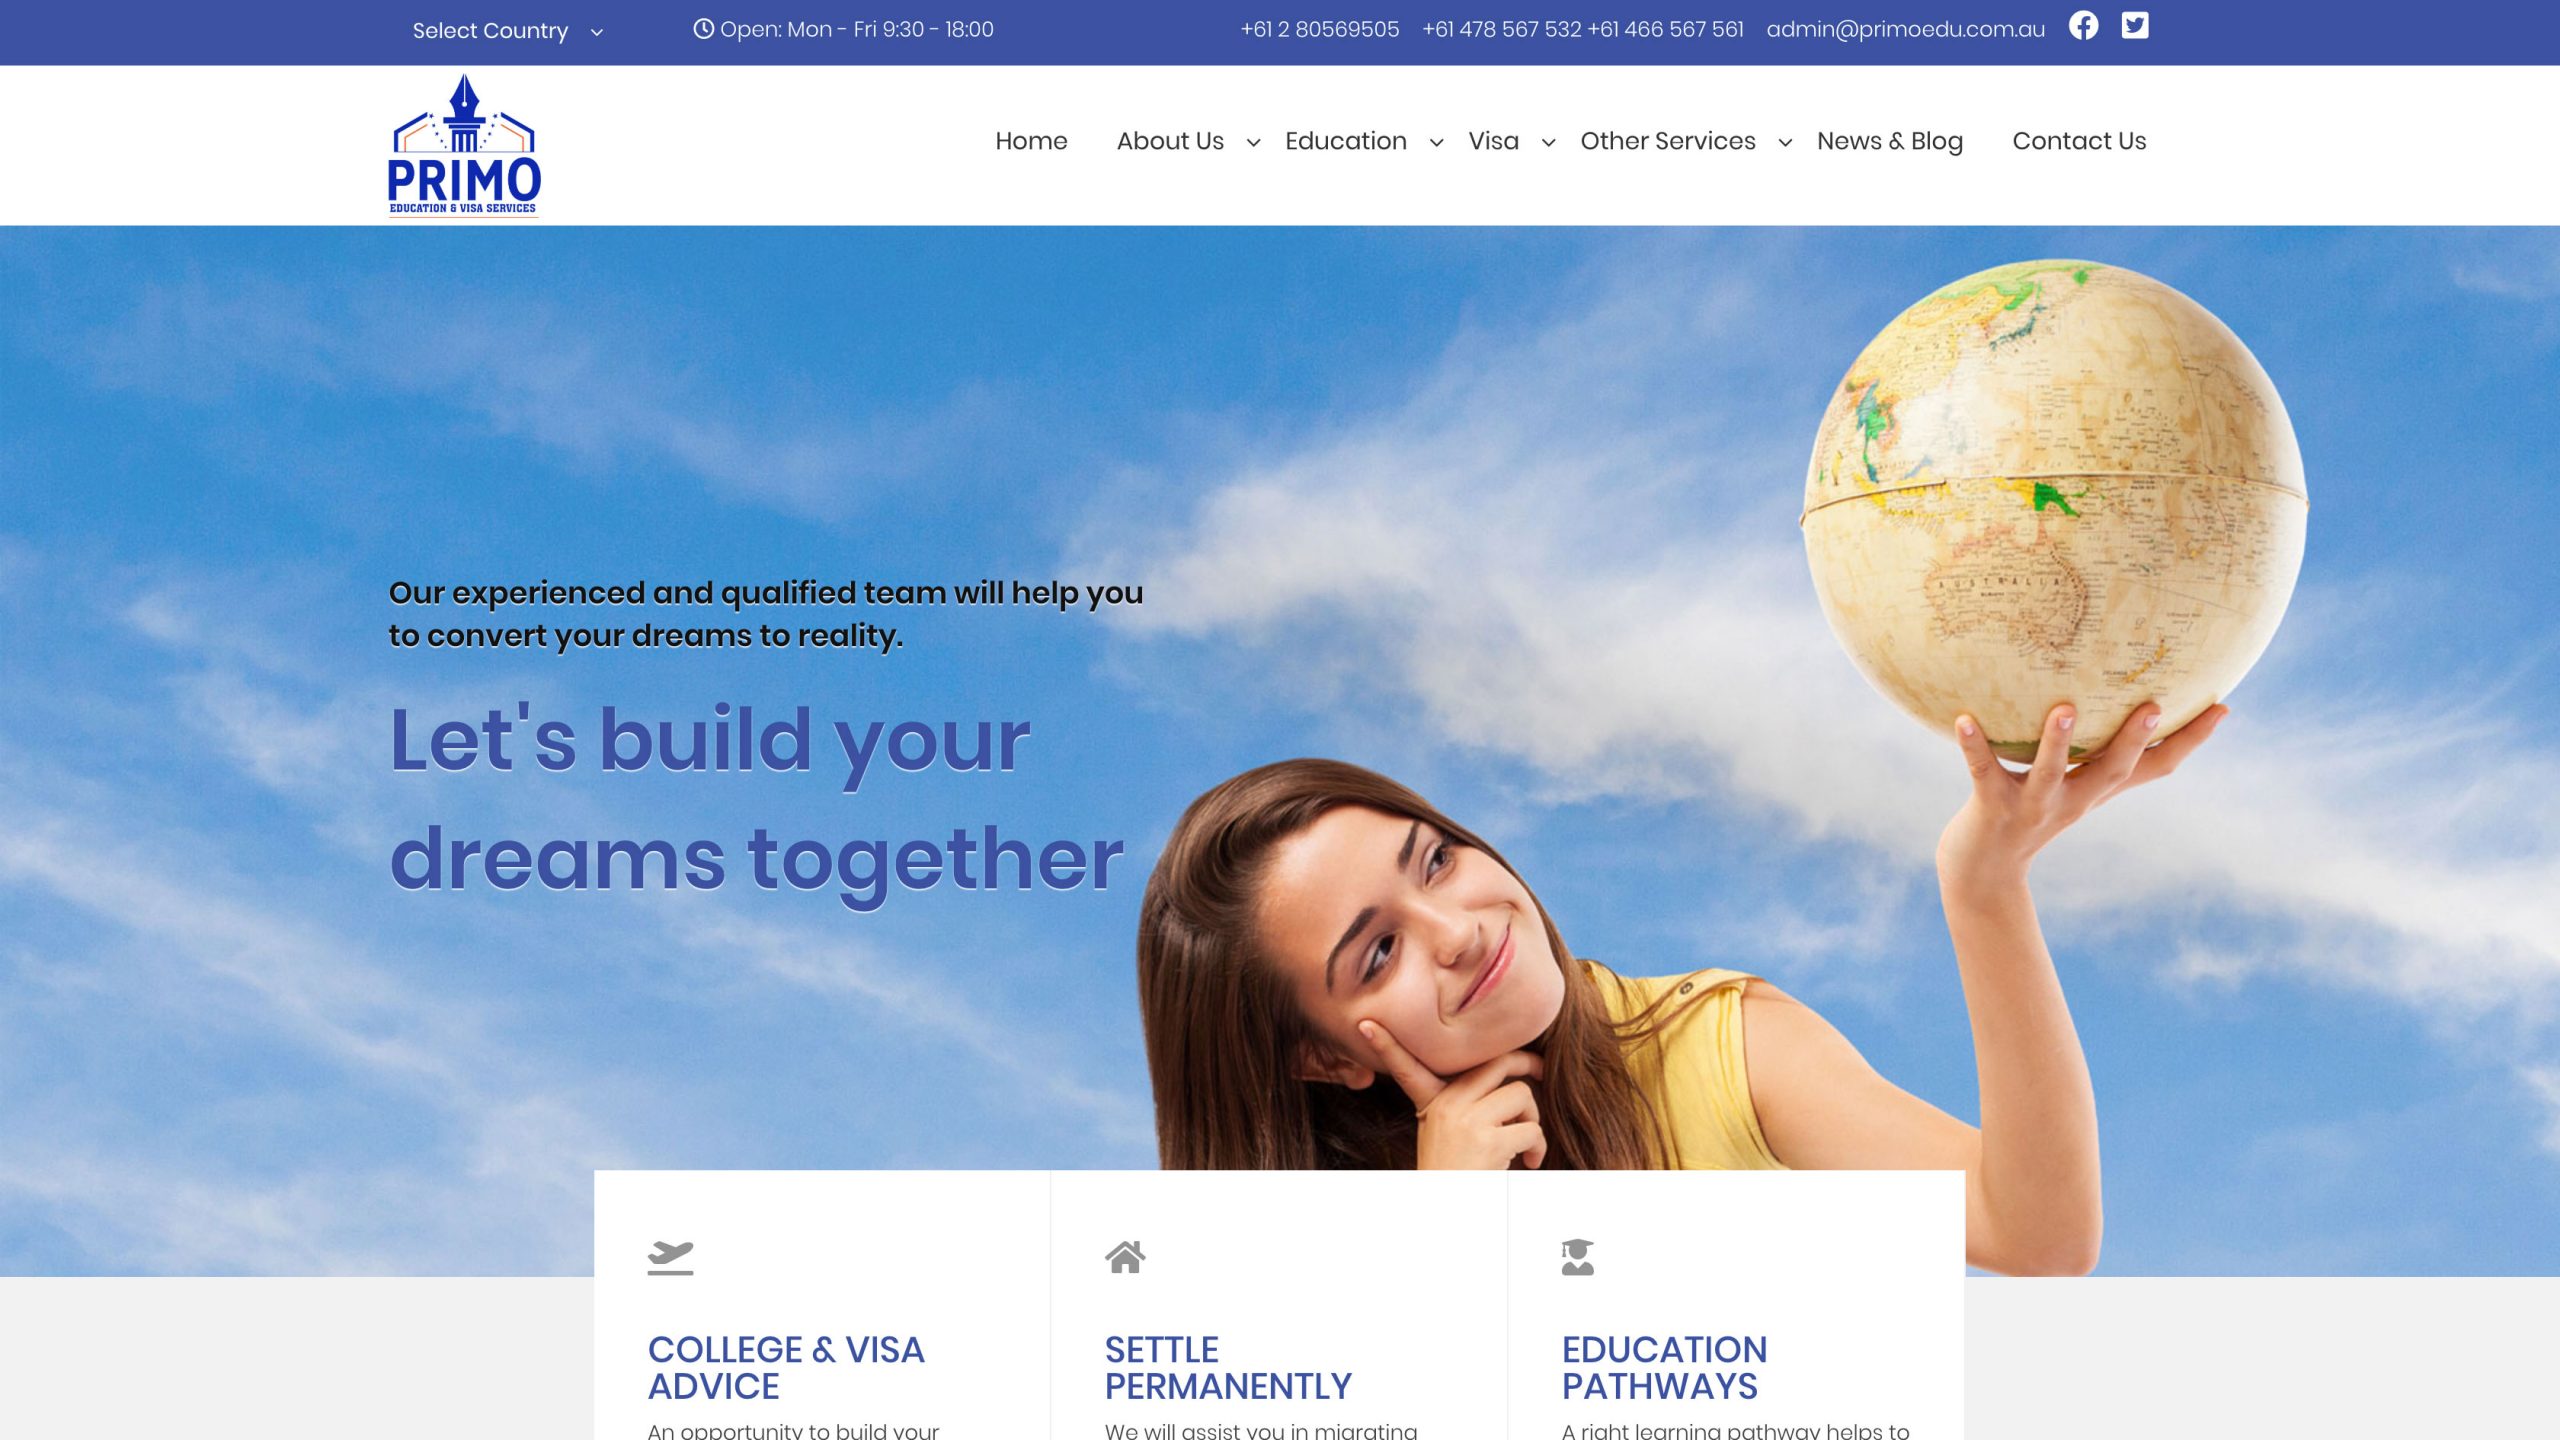 Primo Education and Visa Services